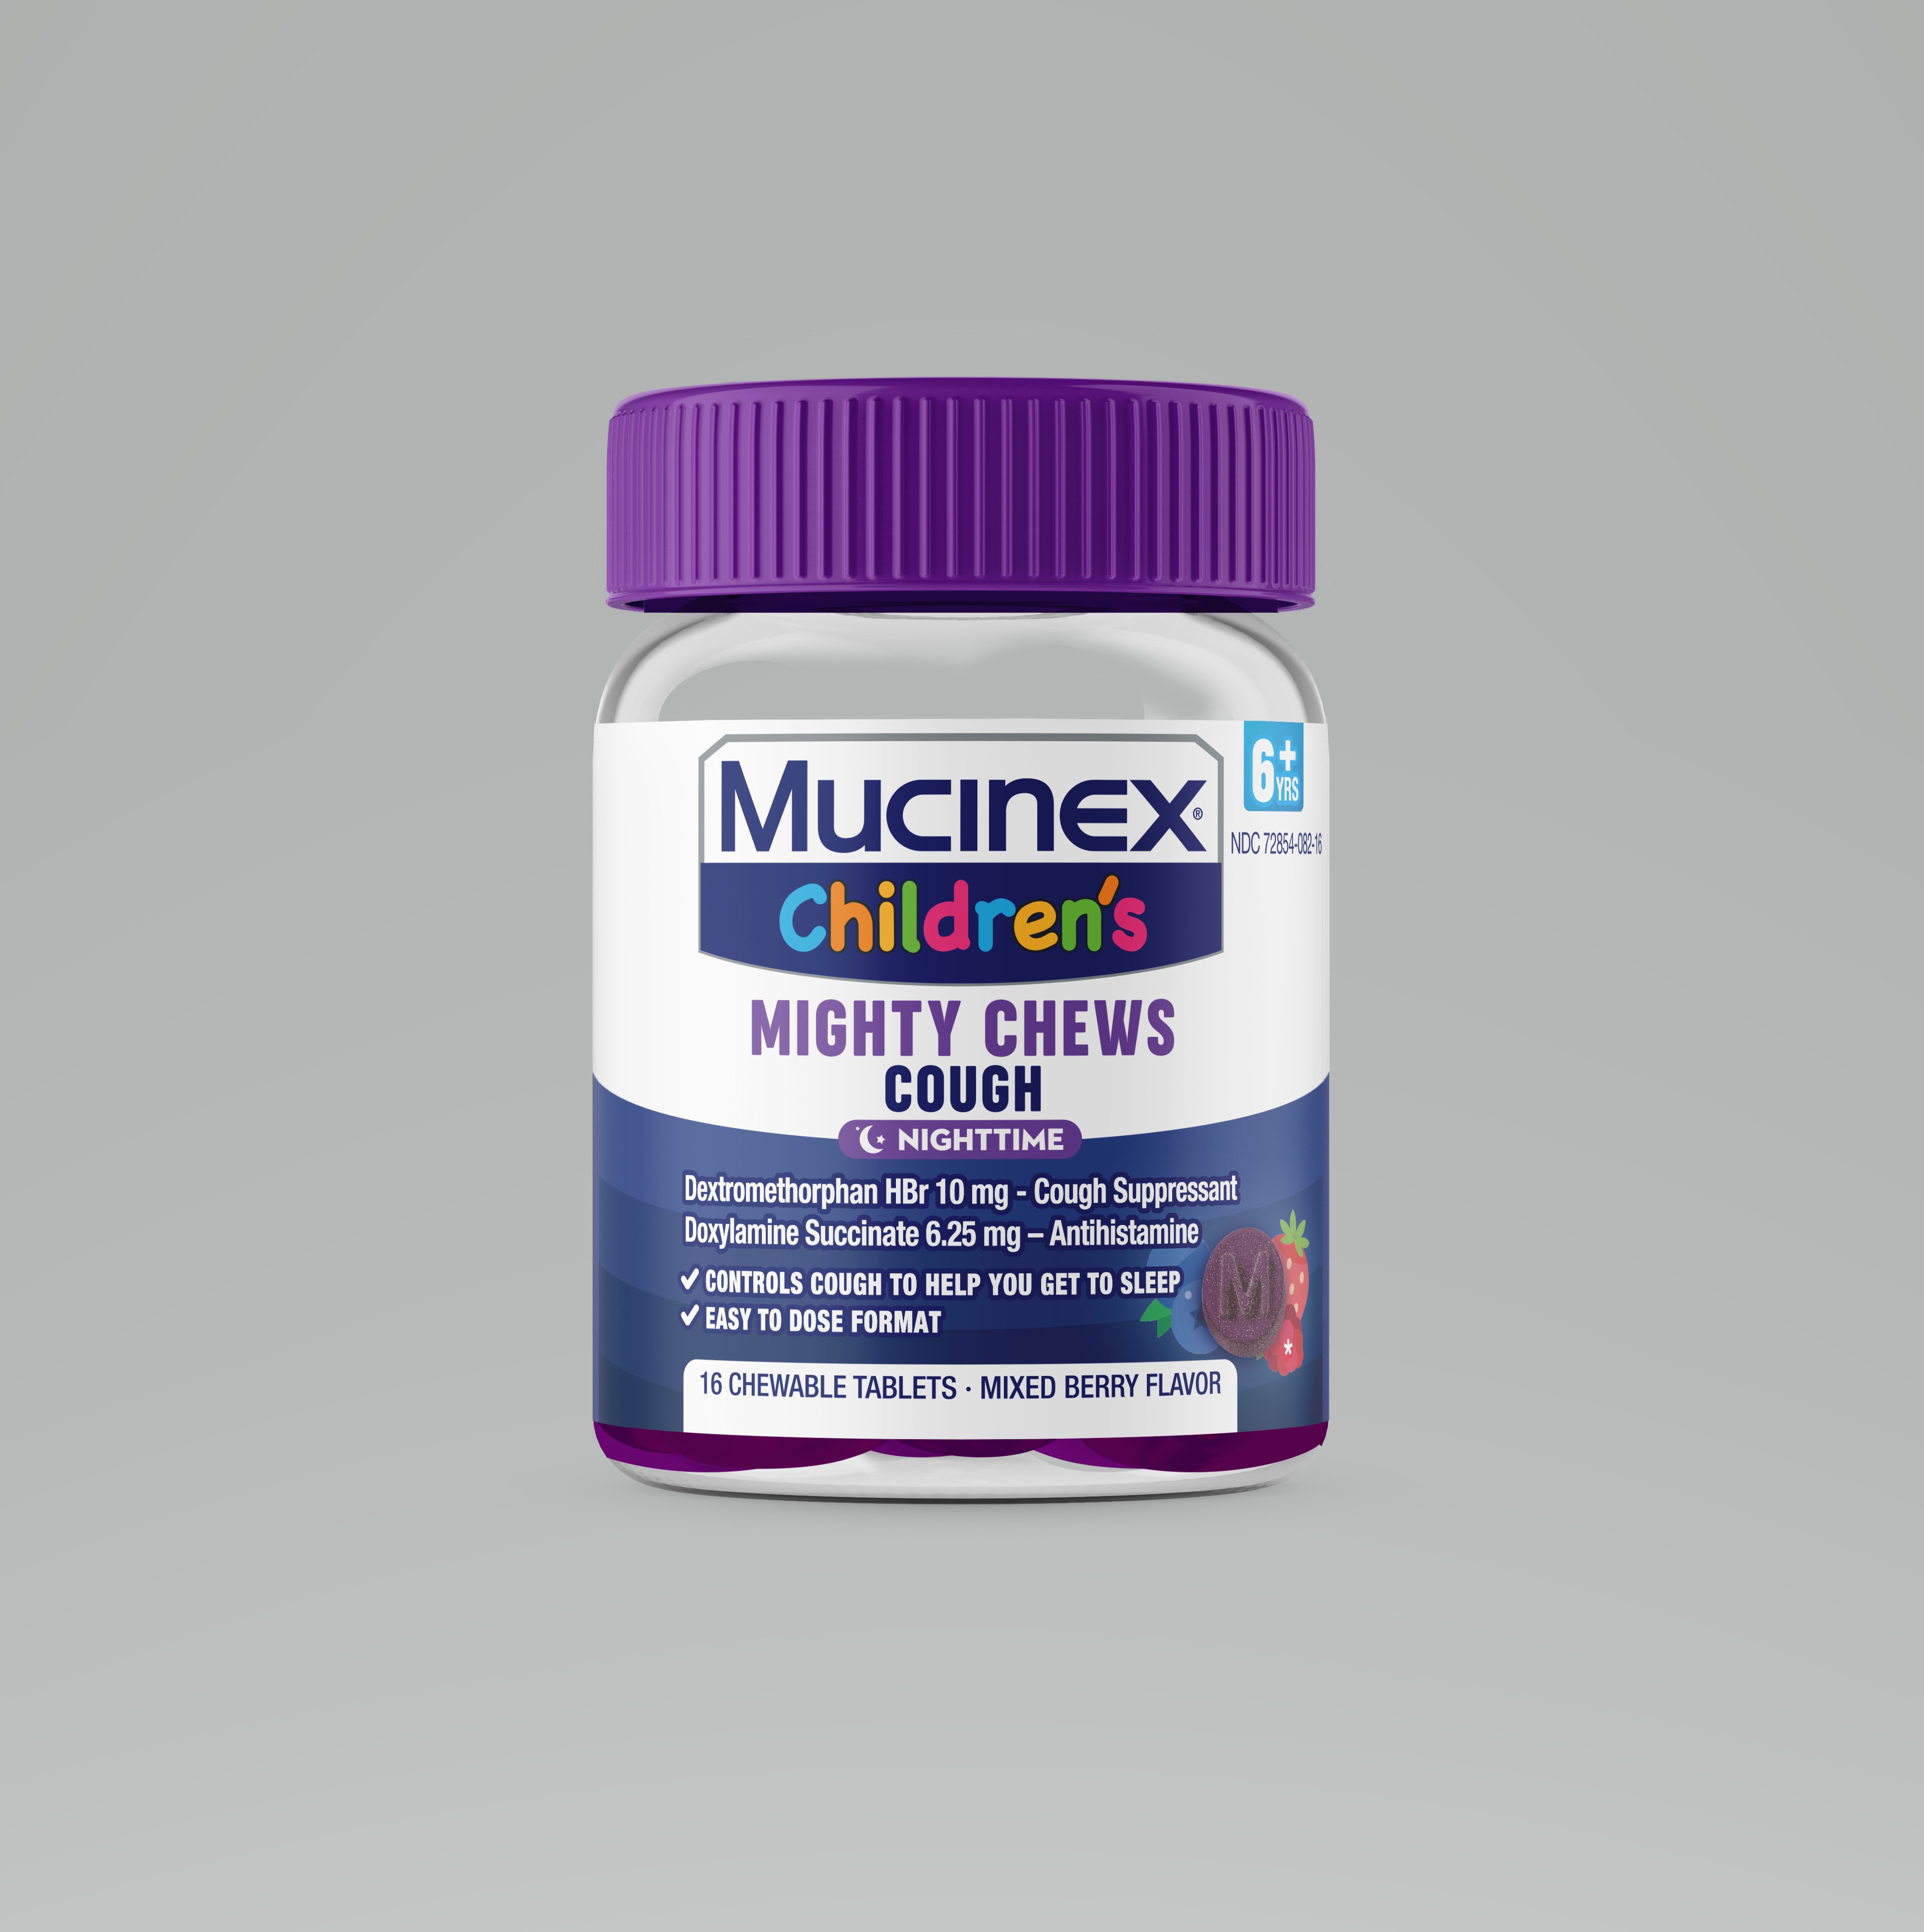 MUCINEX® Children's Mighty Chews - Nighttime Cough - Mixed Berry Flavor